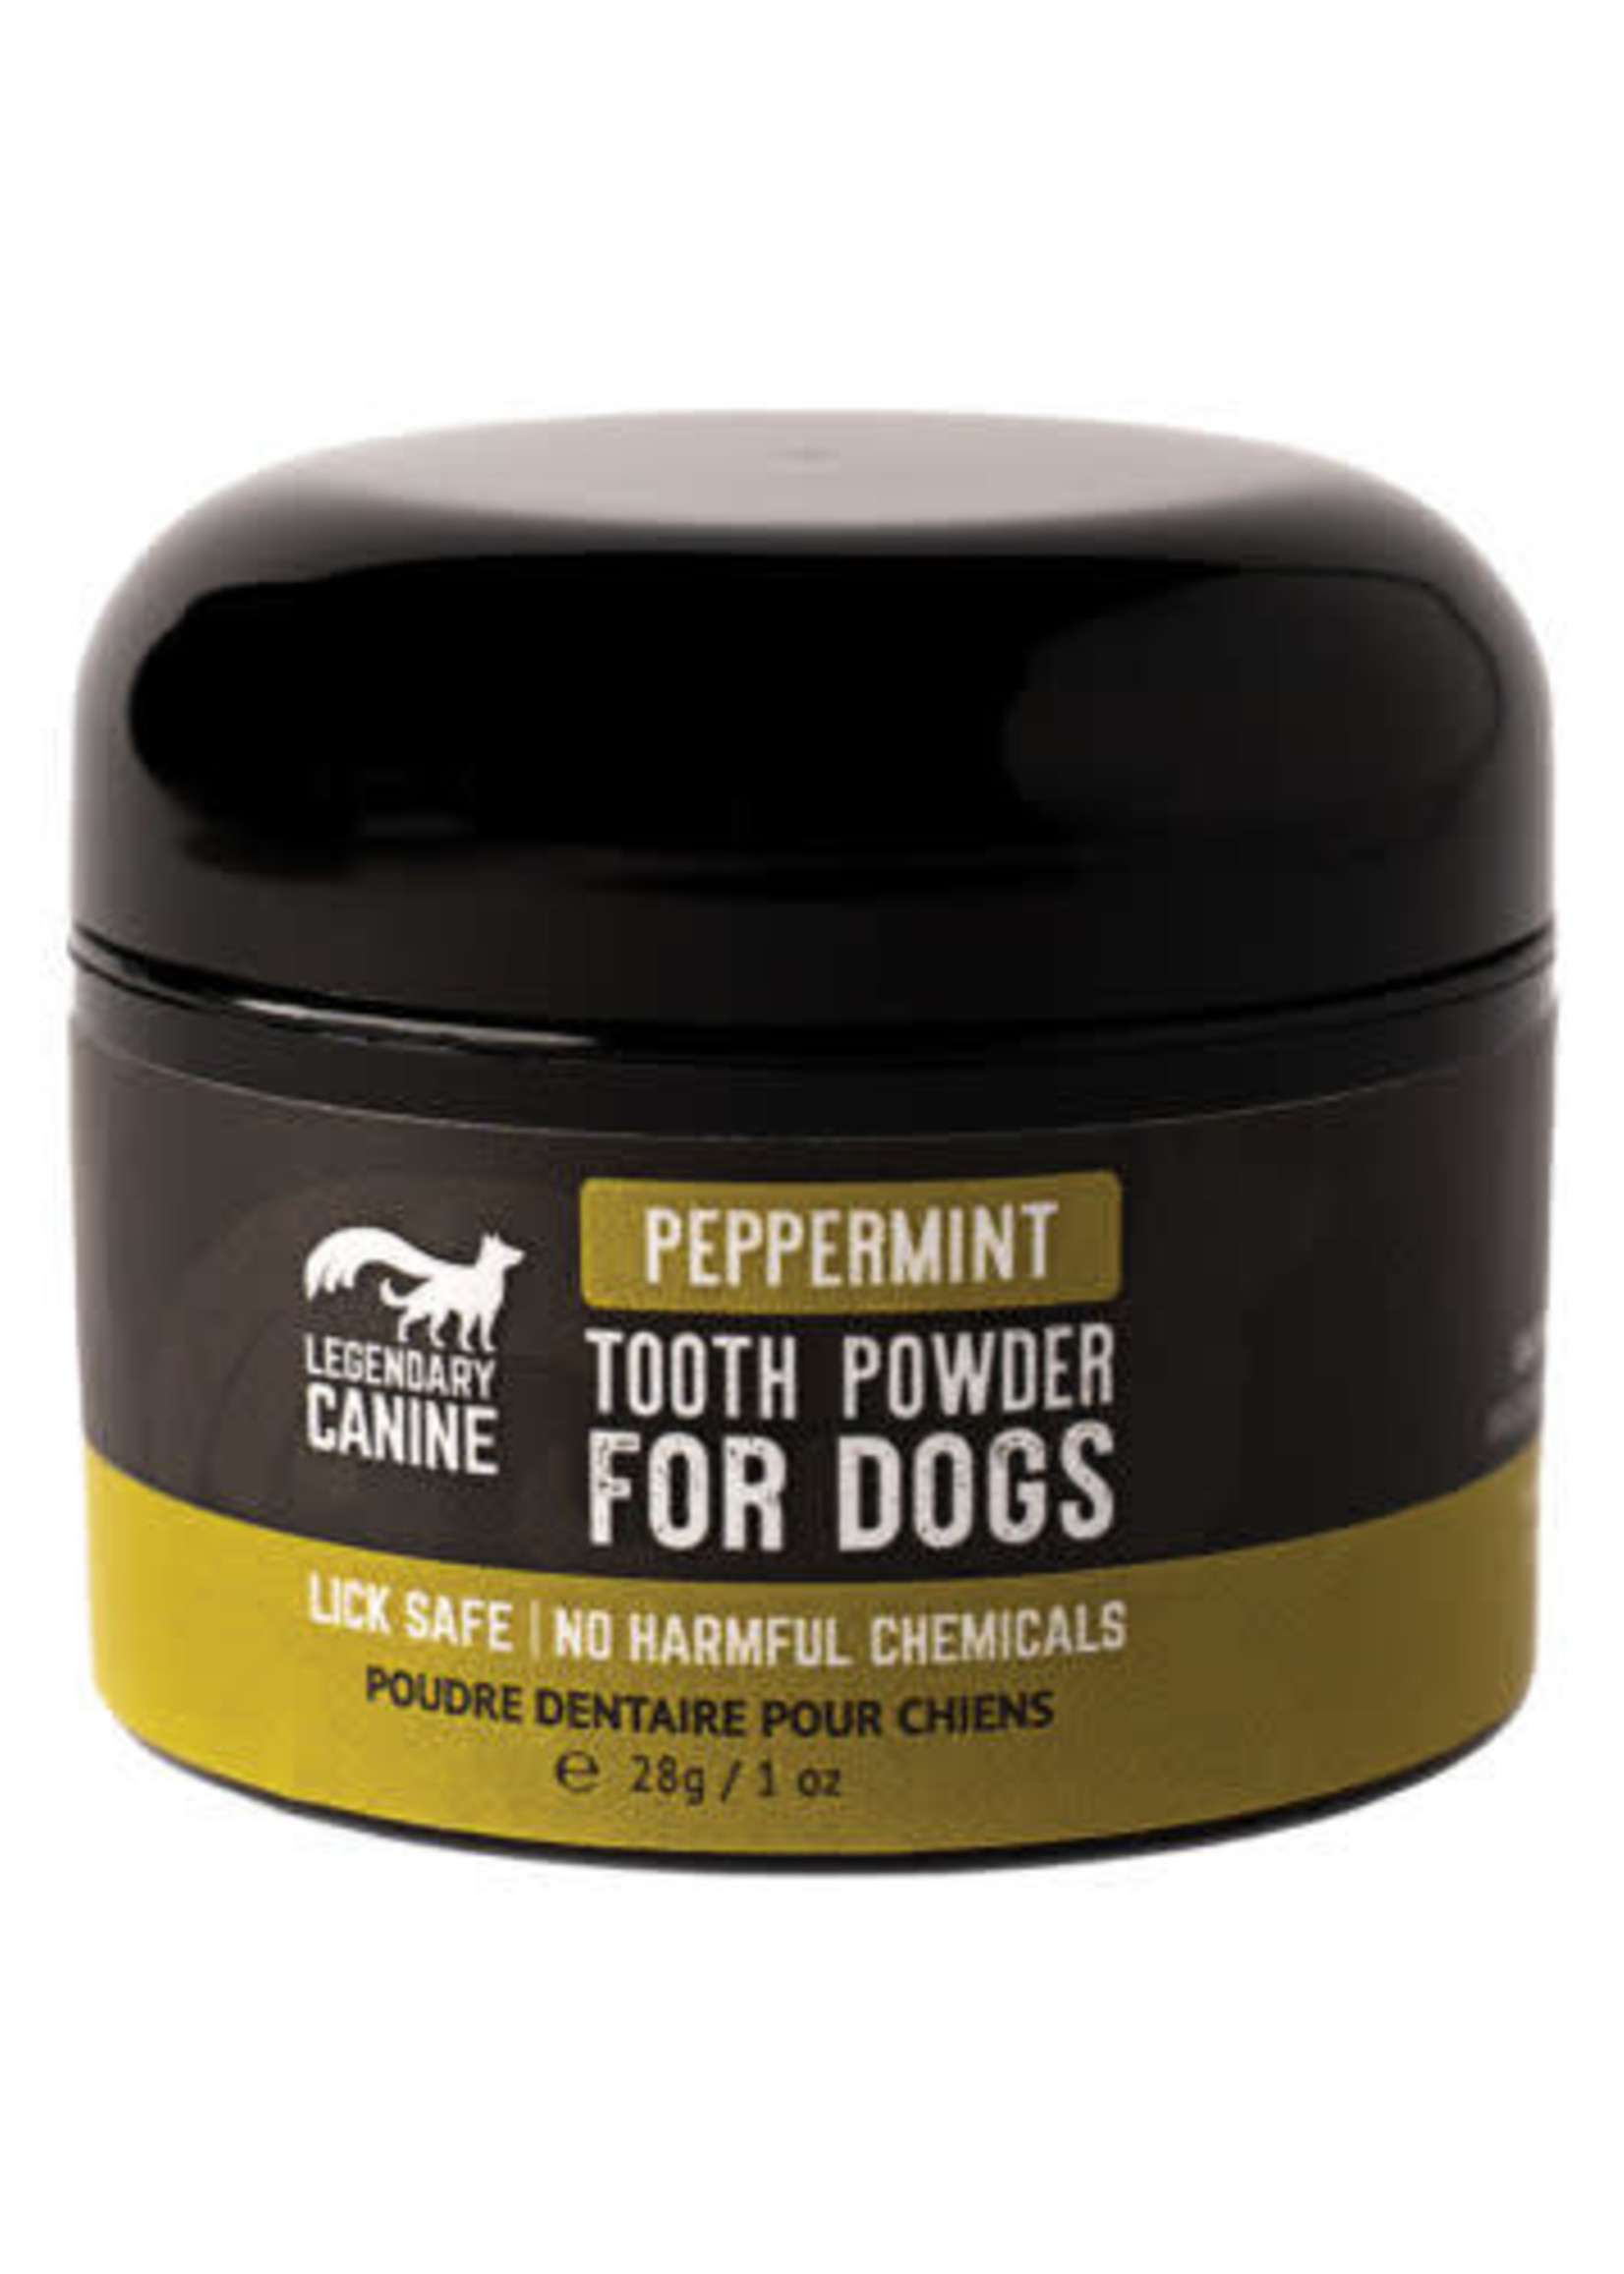 Legendary Canine© Legendary Canine© Tooth Powder For Dogs